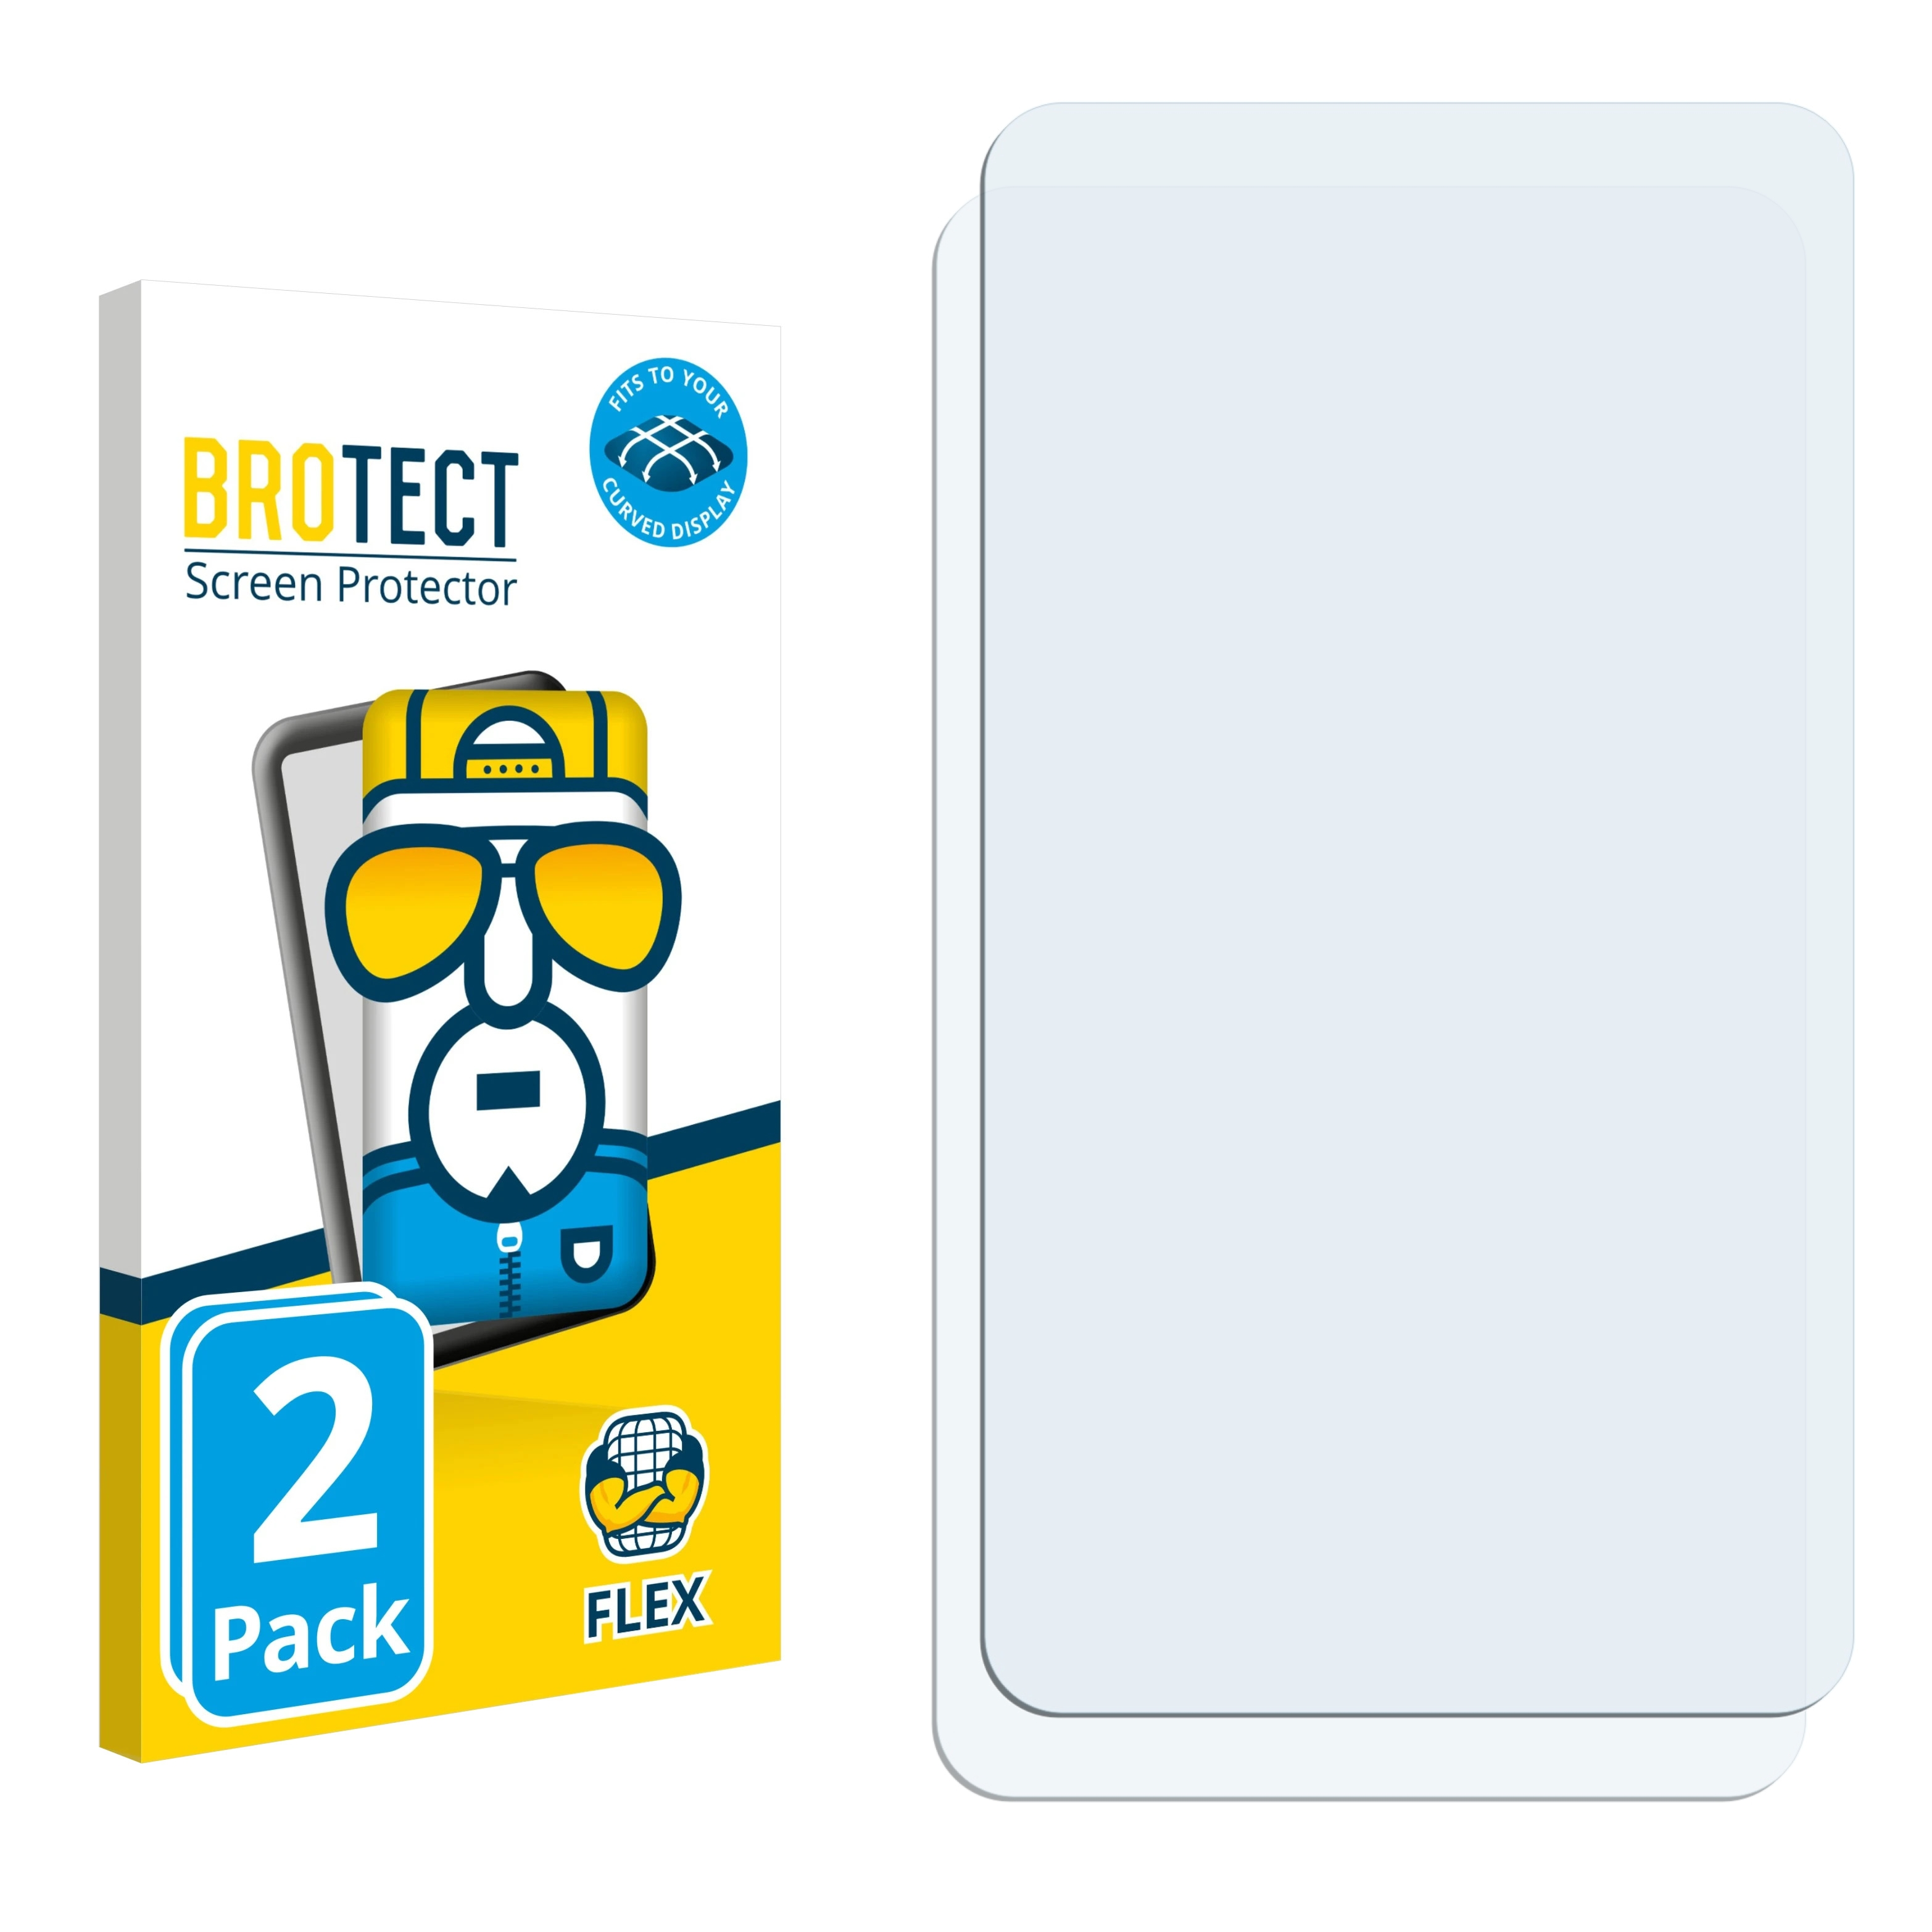 BROTECT 2x Flex Full-Cover 3D Zettle Schutzfolie(für Paypal)) (by Terminal Curved